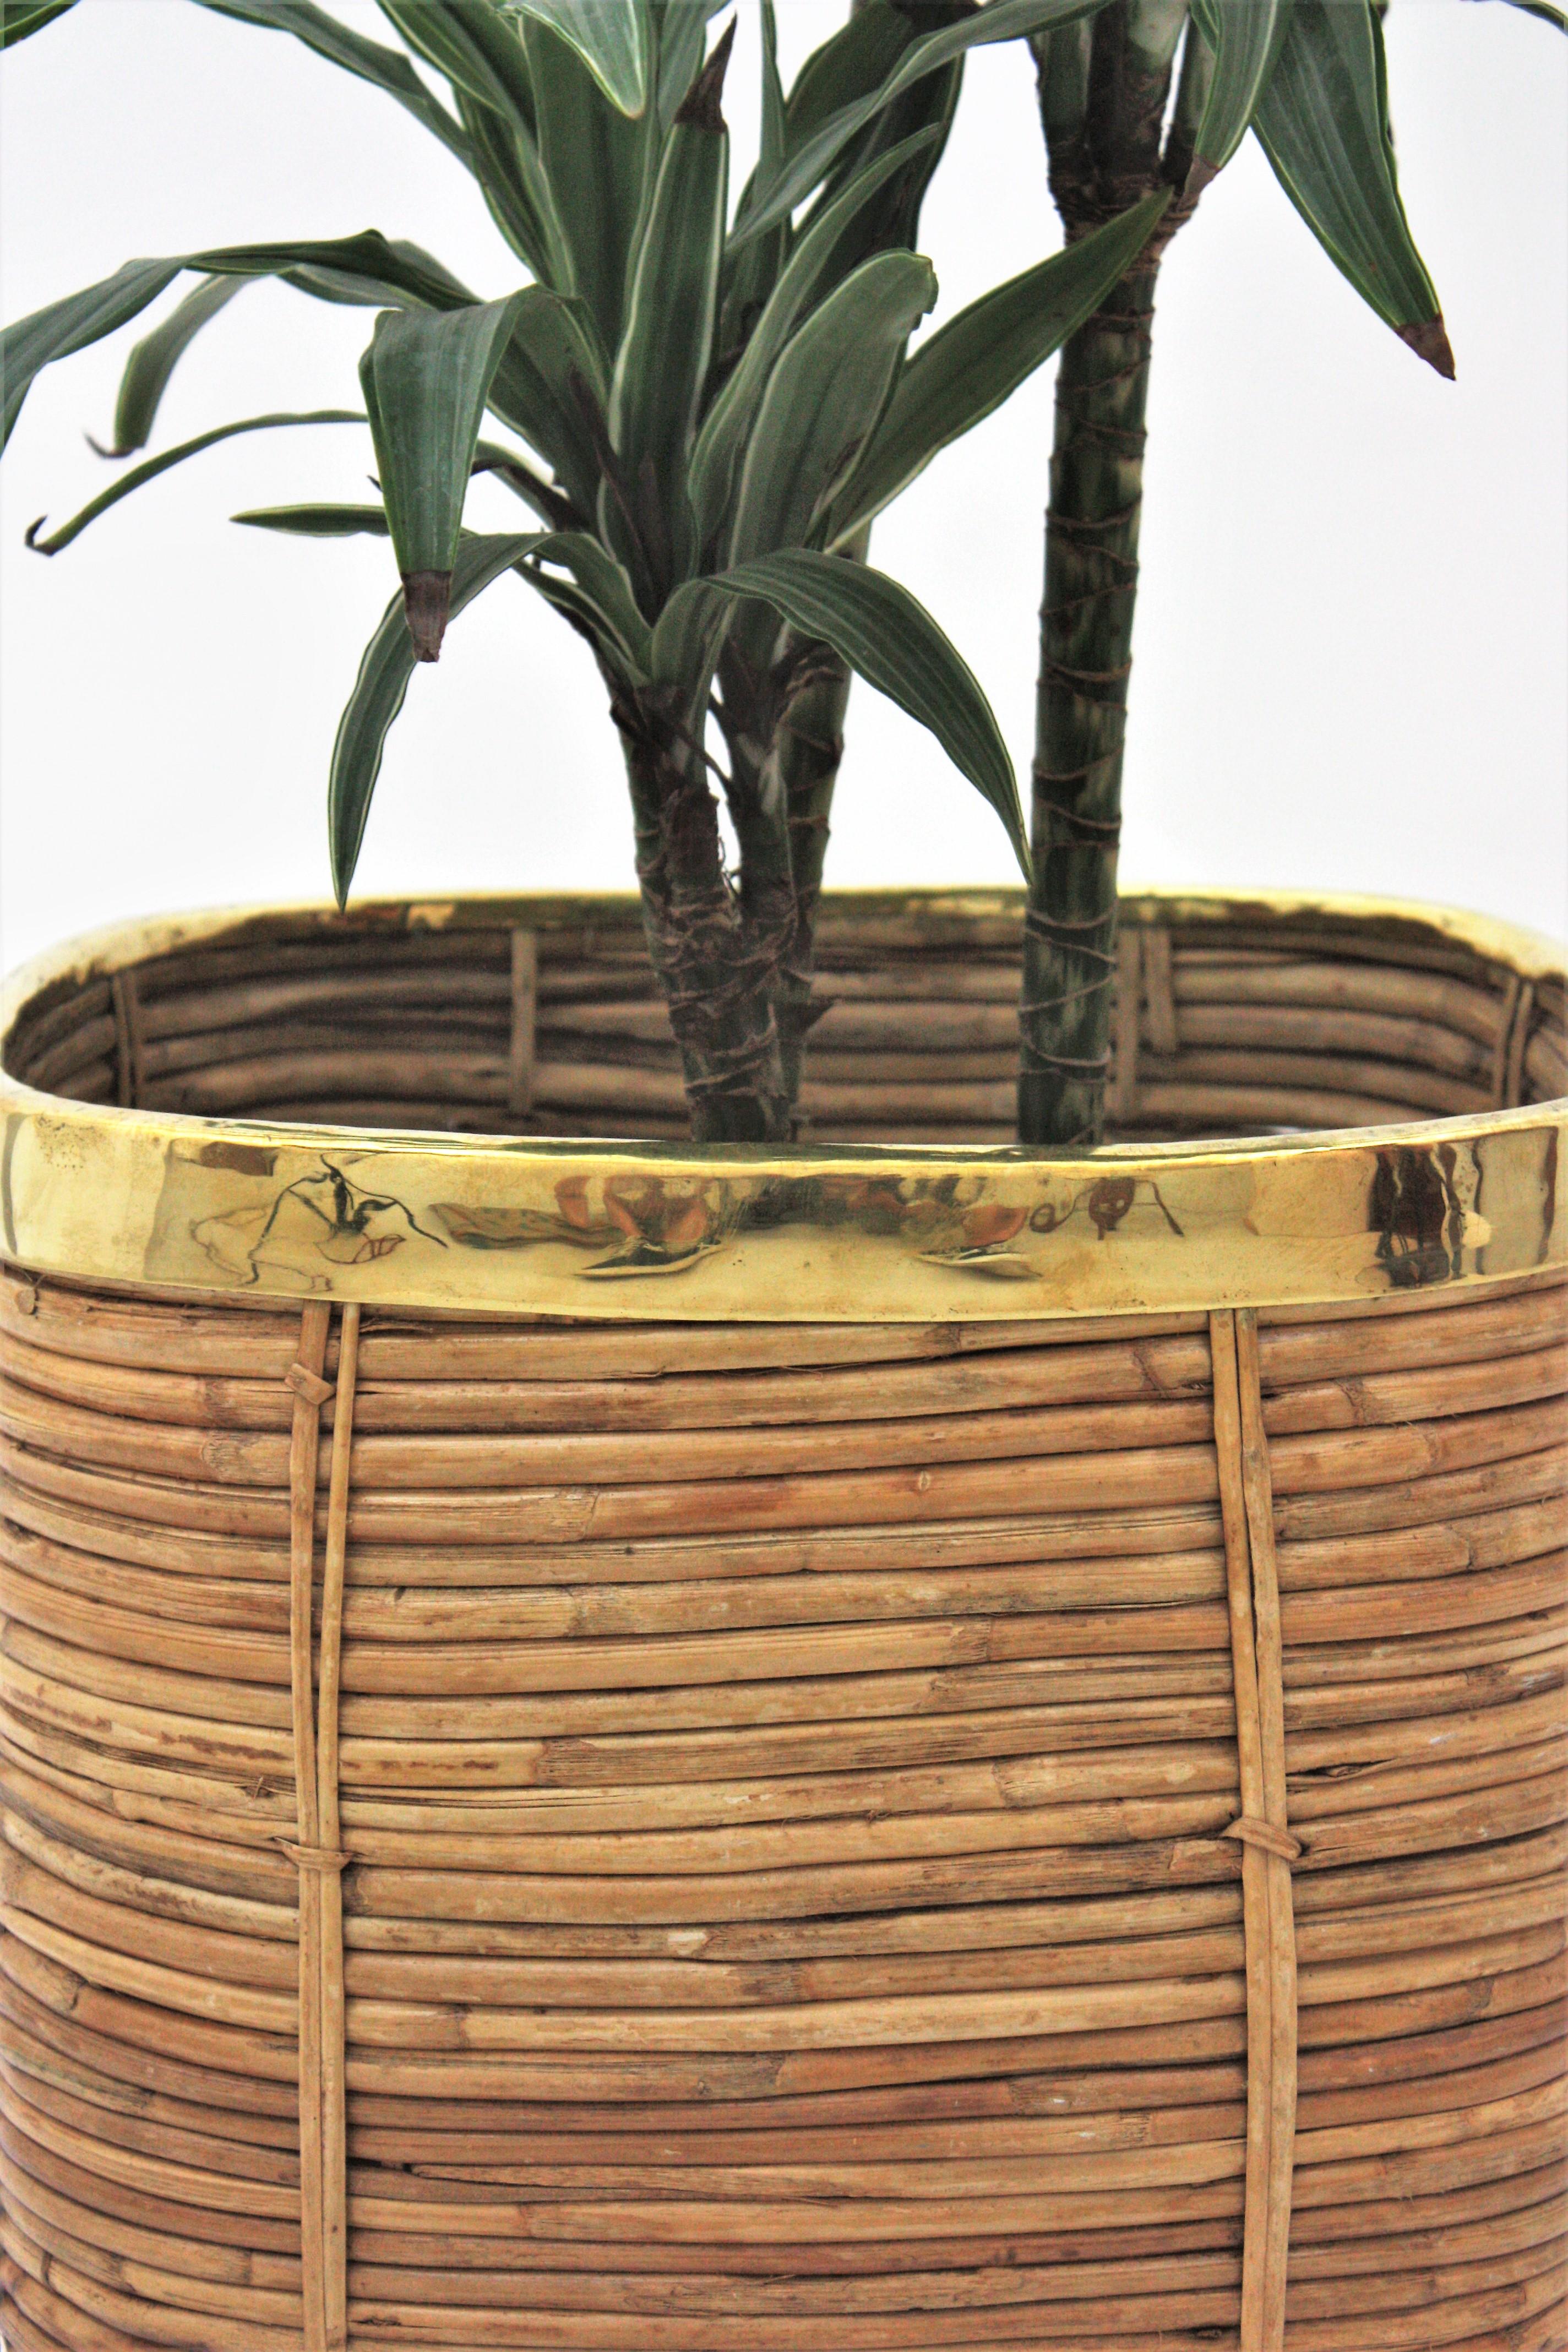 Large Italian Rattan and Brass Crespi Style Square Basket Planter, 1970s For Sale 8